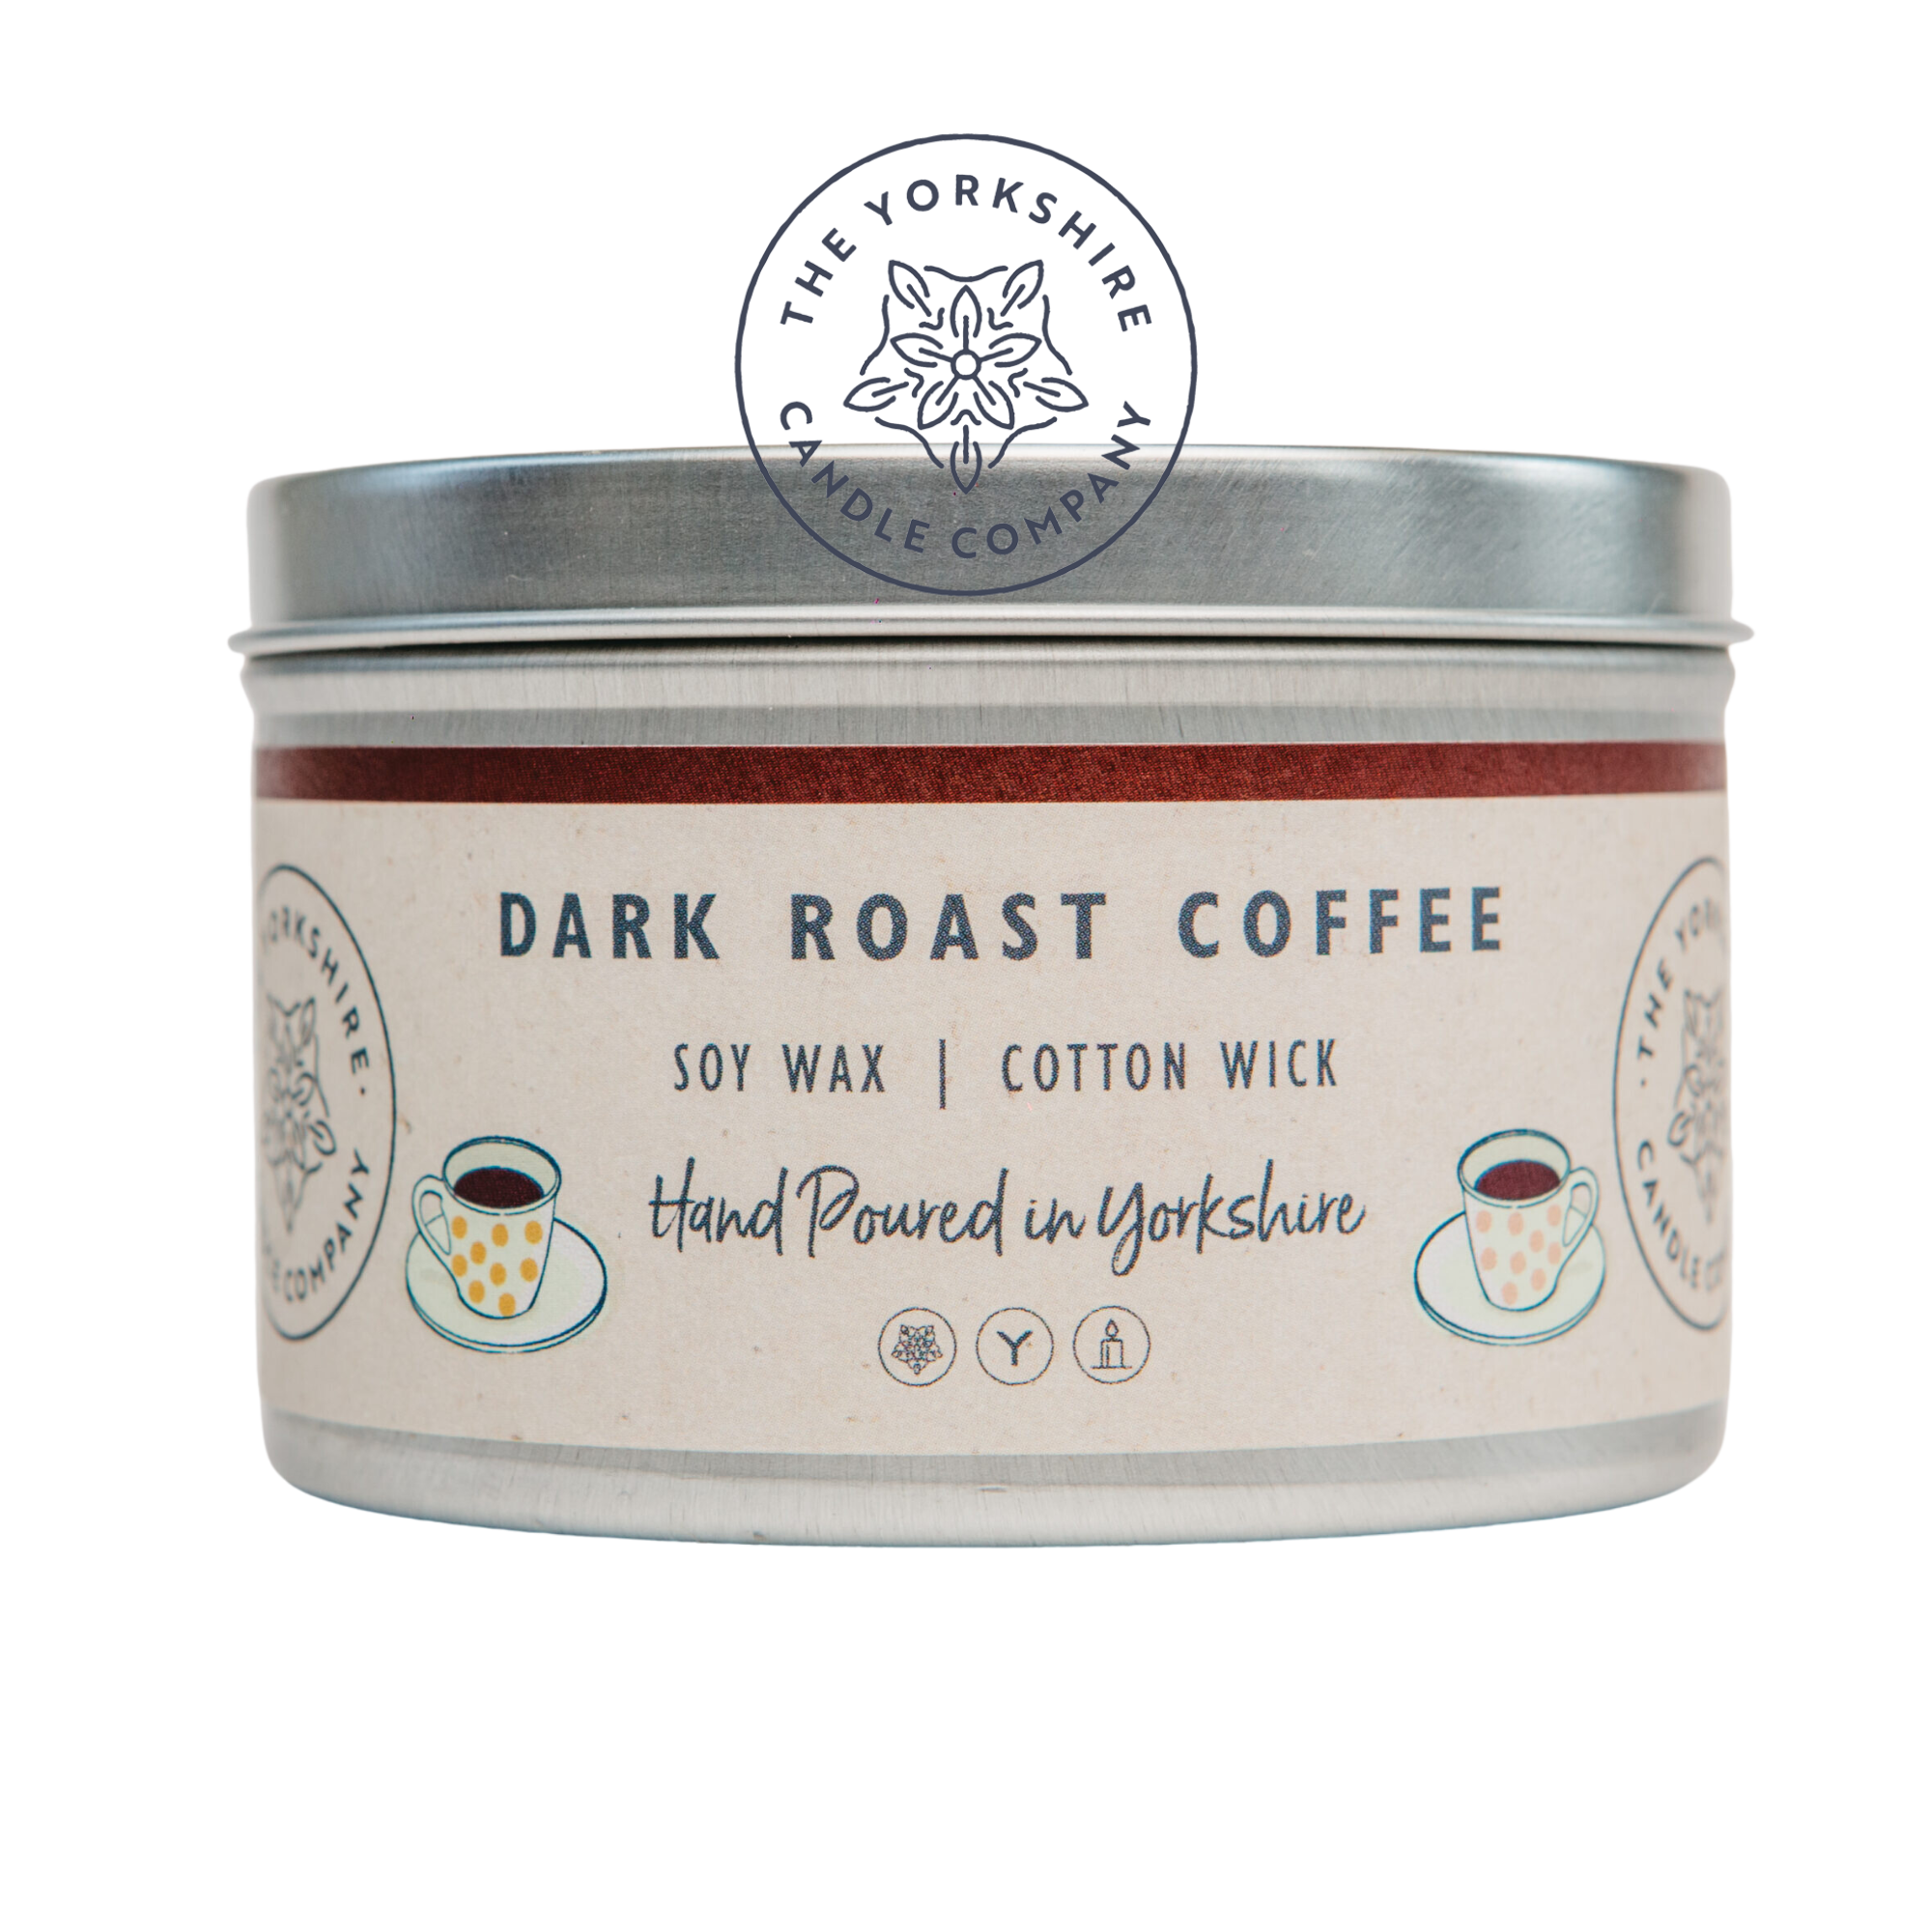 Dark Roast Coffee - Soy Wax Cotton Wick Hand Poured Candle by The Yorkshire Candle Company